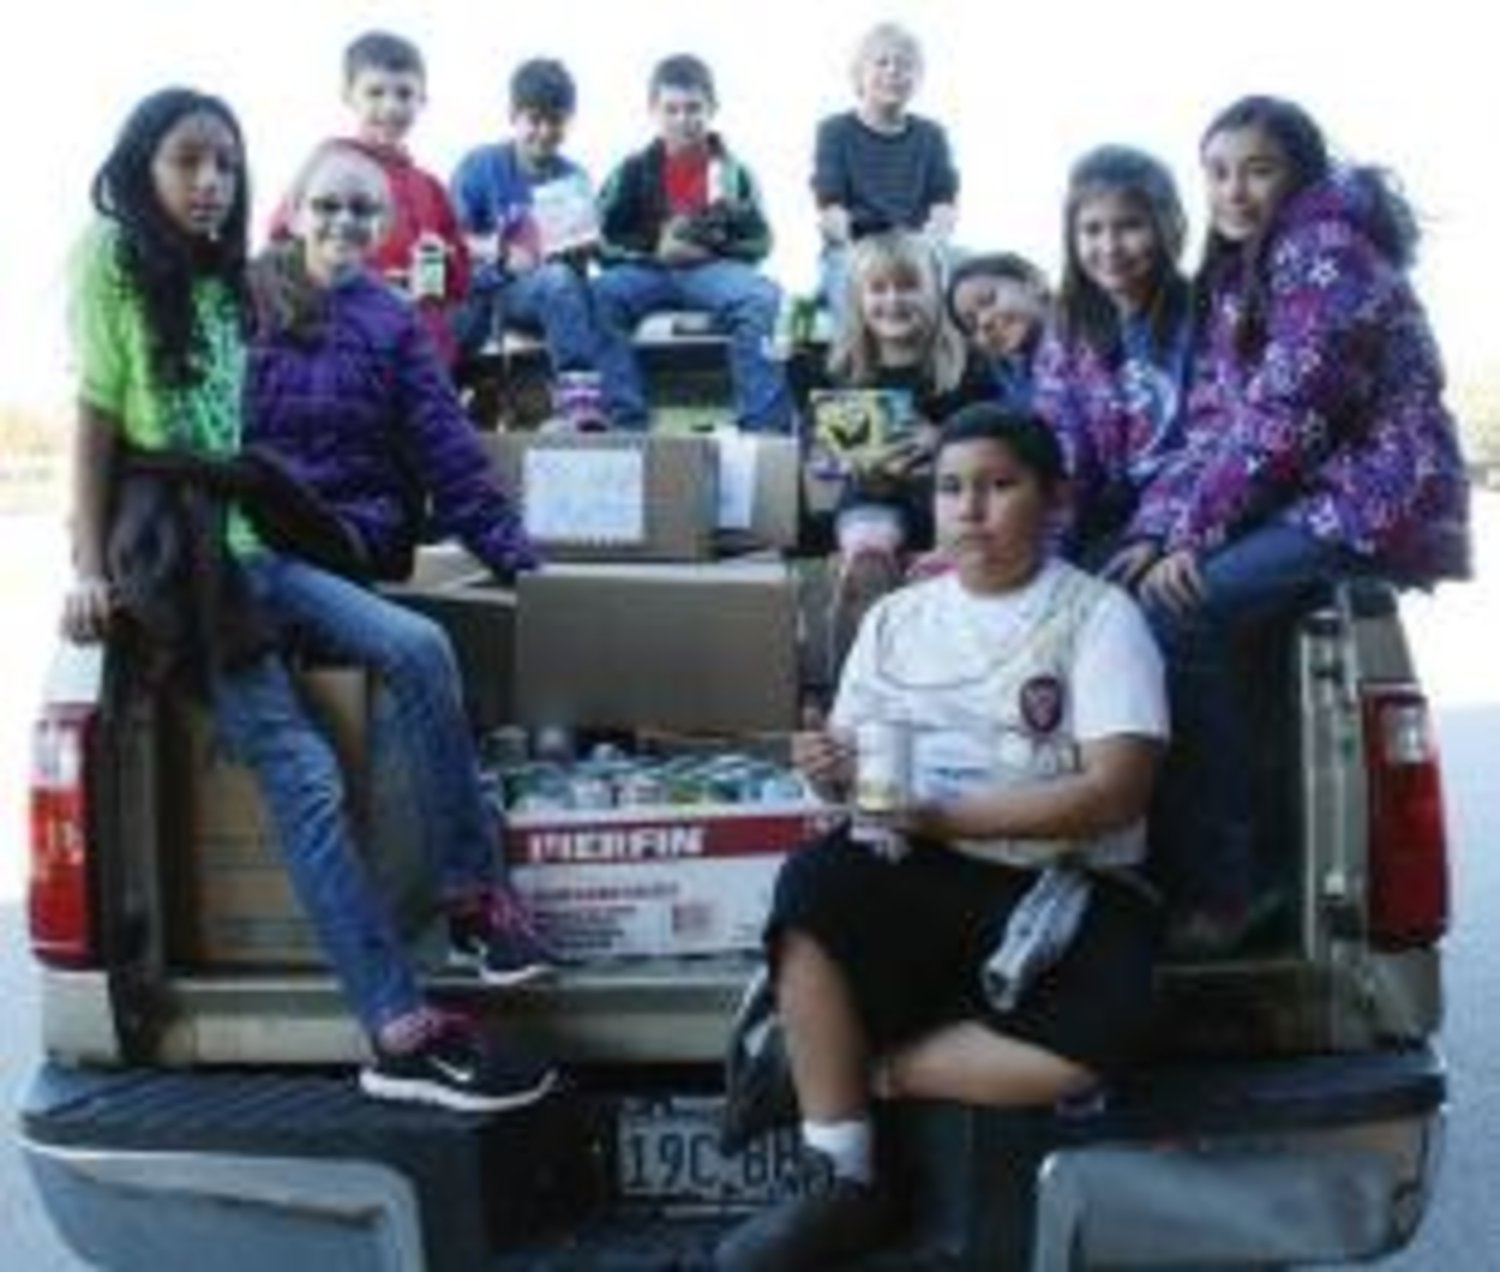 Quitman Elementary School students recently completed a canned food drive to benefit needy families. The students collected more than 2,300 cans of food that will be distributed through Quitman's Christmas Sharing- PLUS on Dec. 8. Pictured, left to right, are Paws Squad members Jennifer Ibarra, Lucy Brannon, River Chaney, Nicholas Barrett, Marcus Pollard, Kalen Wilkerson, Katherine Hudman, Citlaly Flores, Alexie McLemore, Kayla Munger and Oscar Roman.